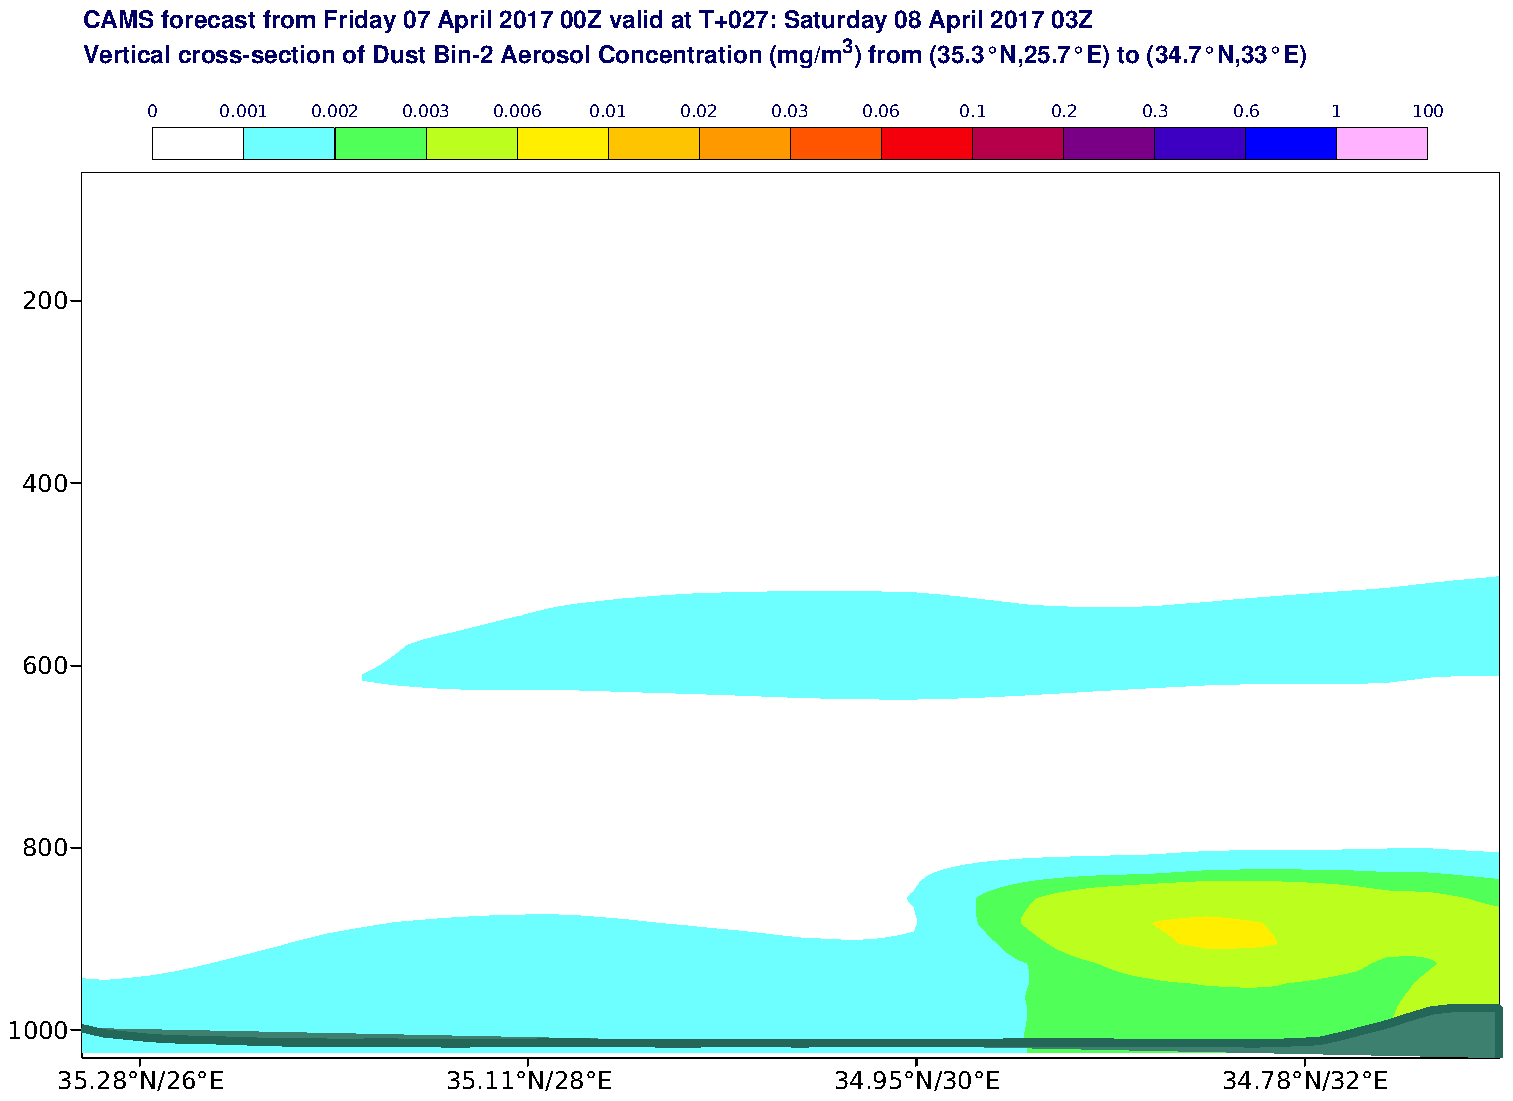 Vertical cross-section of Dust Bin-2 Aerosol Concentration (mg/m3) valid at T27 - 2017-04-08 03:00